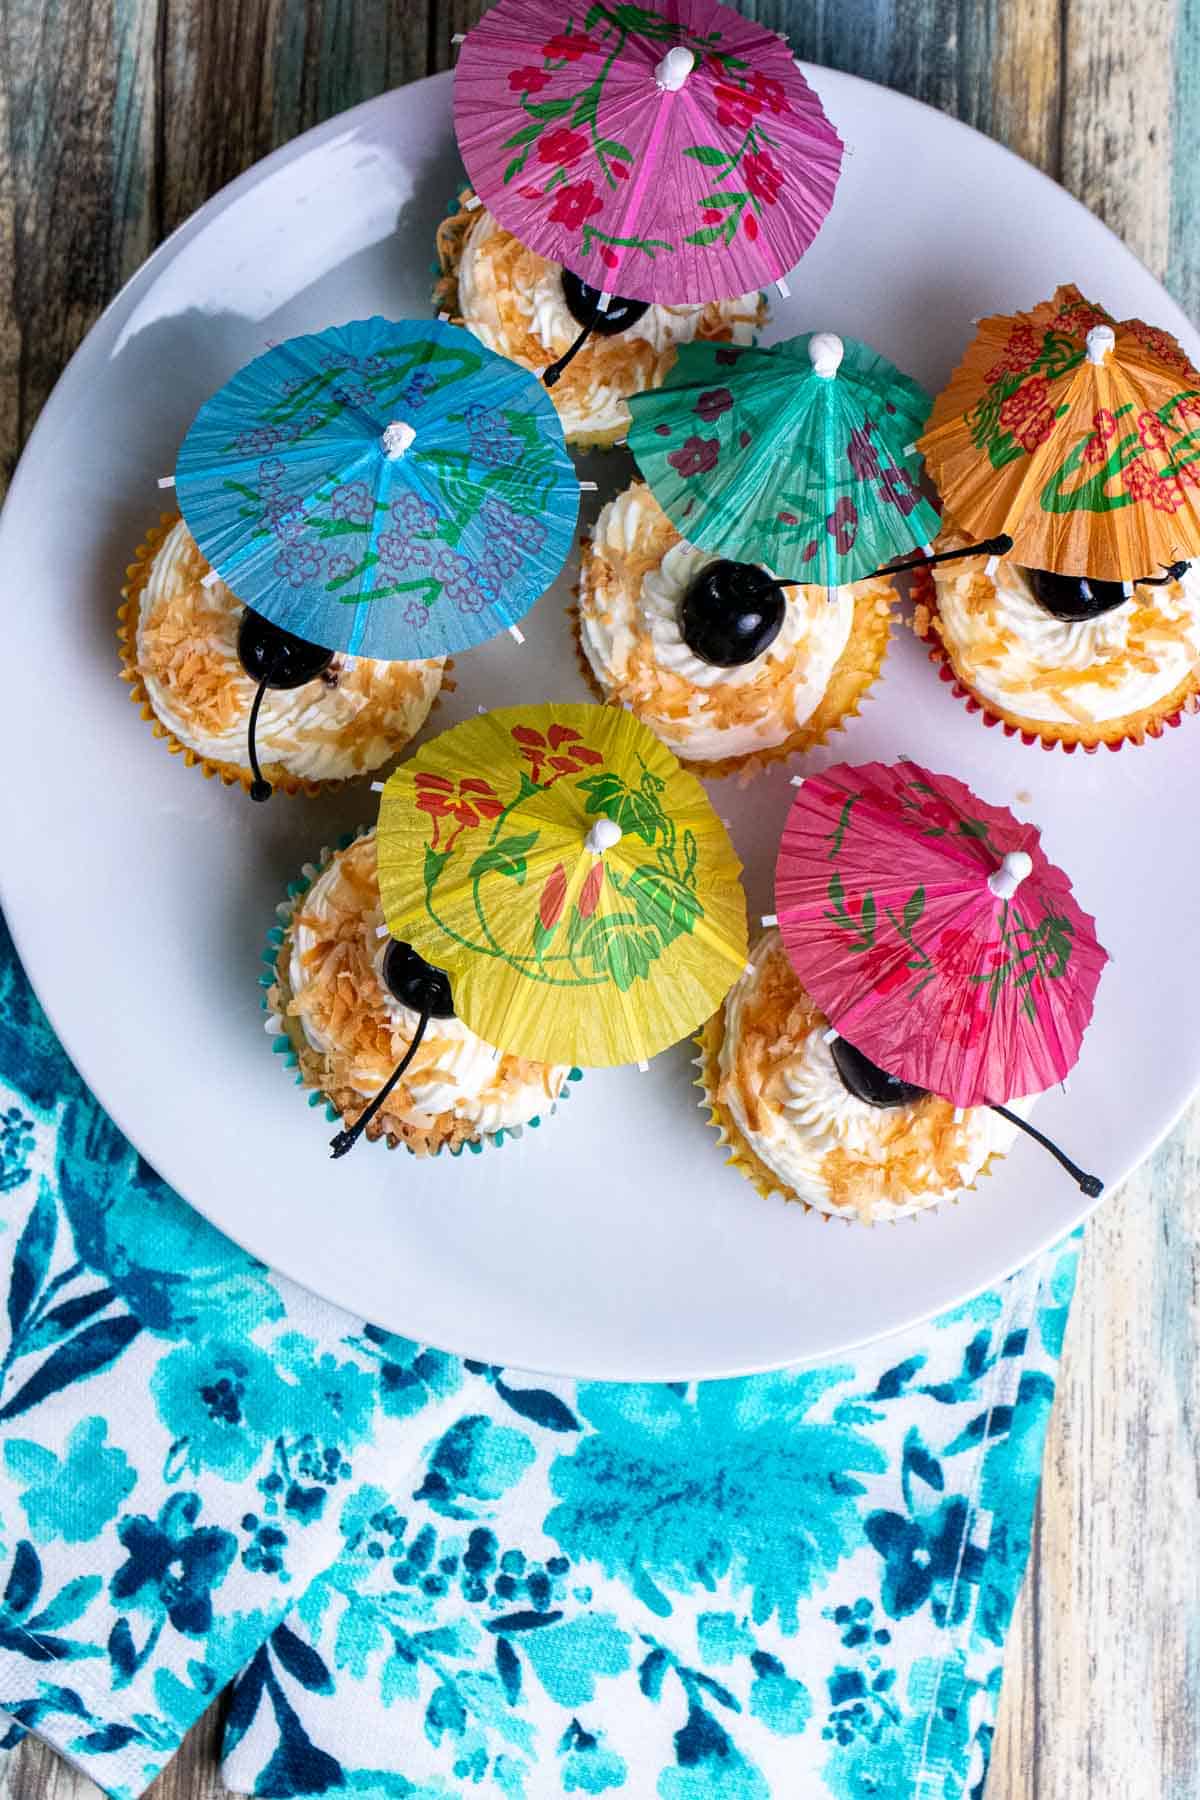 Overhead view of pina colada cupcakes on a white plate over a blue towel, decorated with toasted coconut, a cherry, and a cocktail umbrella.